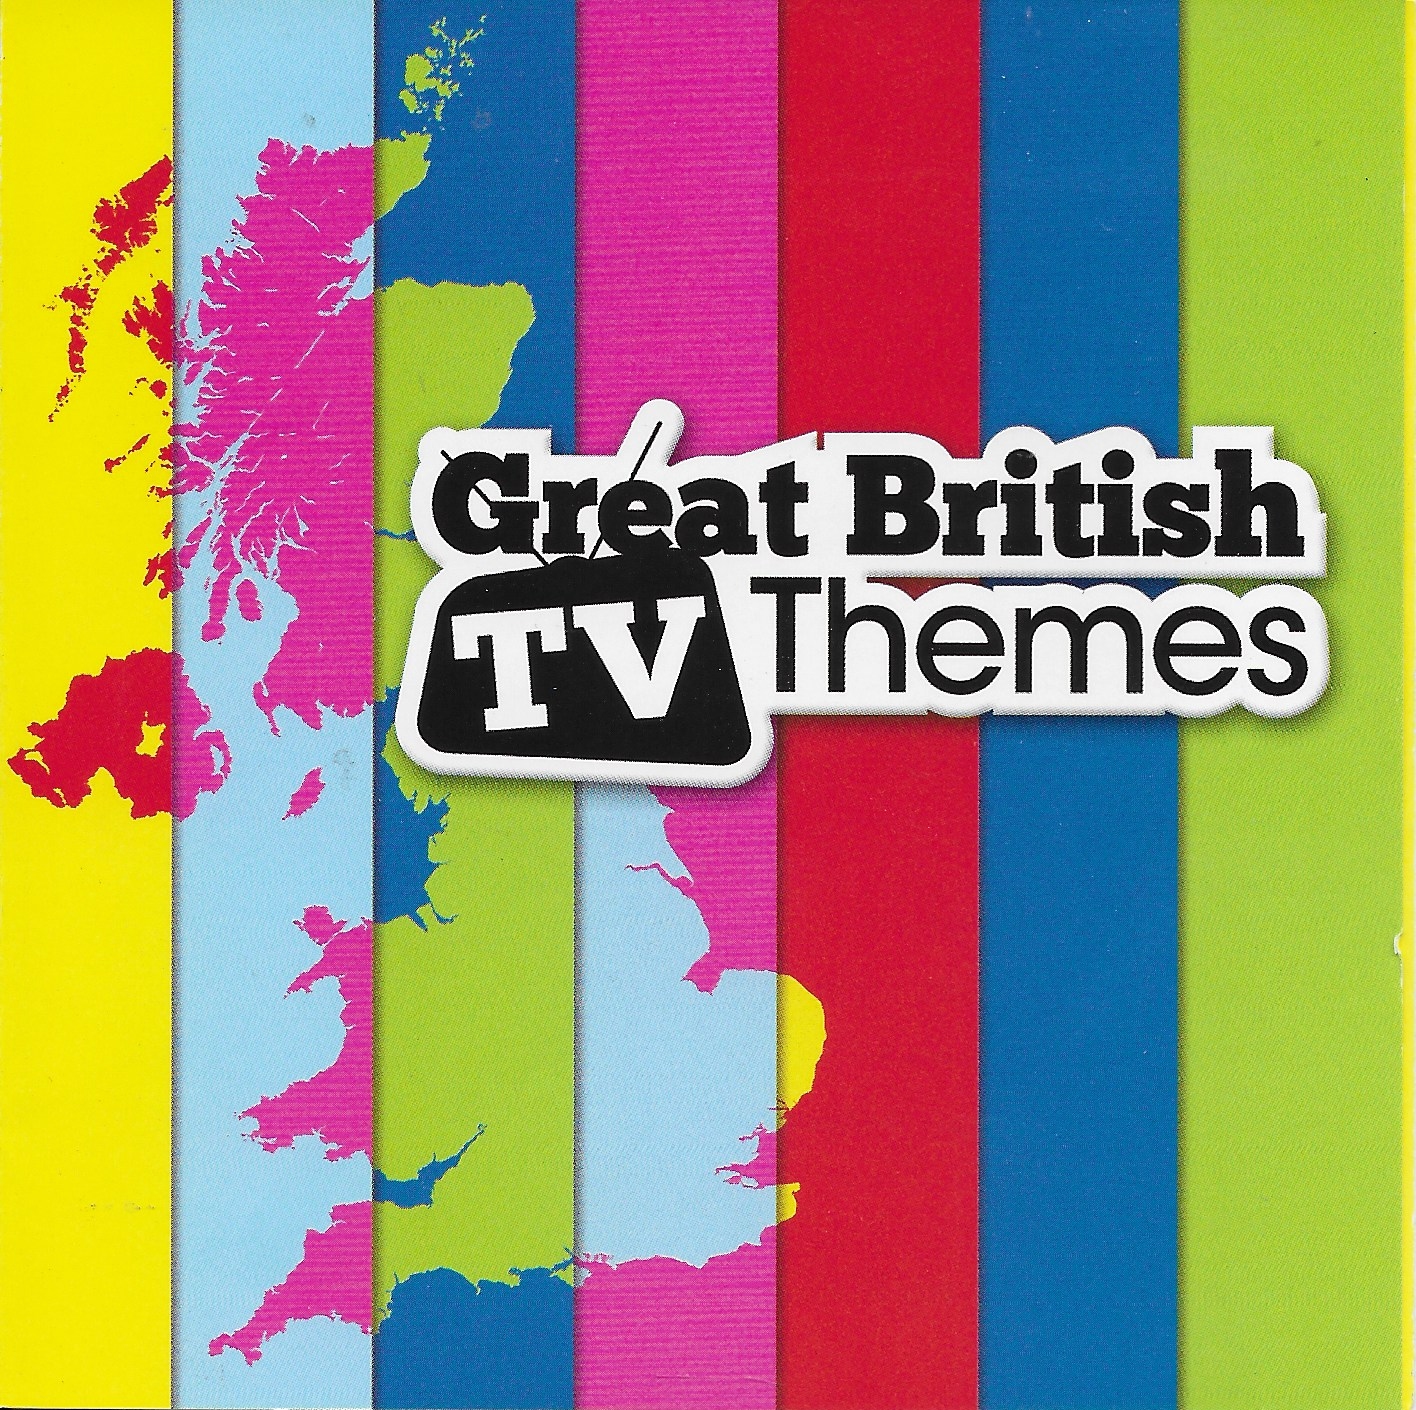 Picture of SILCD 1357 Great British TV themes by artist Various from ITV, Channel 4 and Channel 5 library